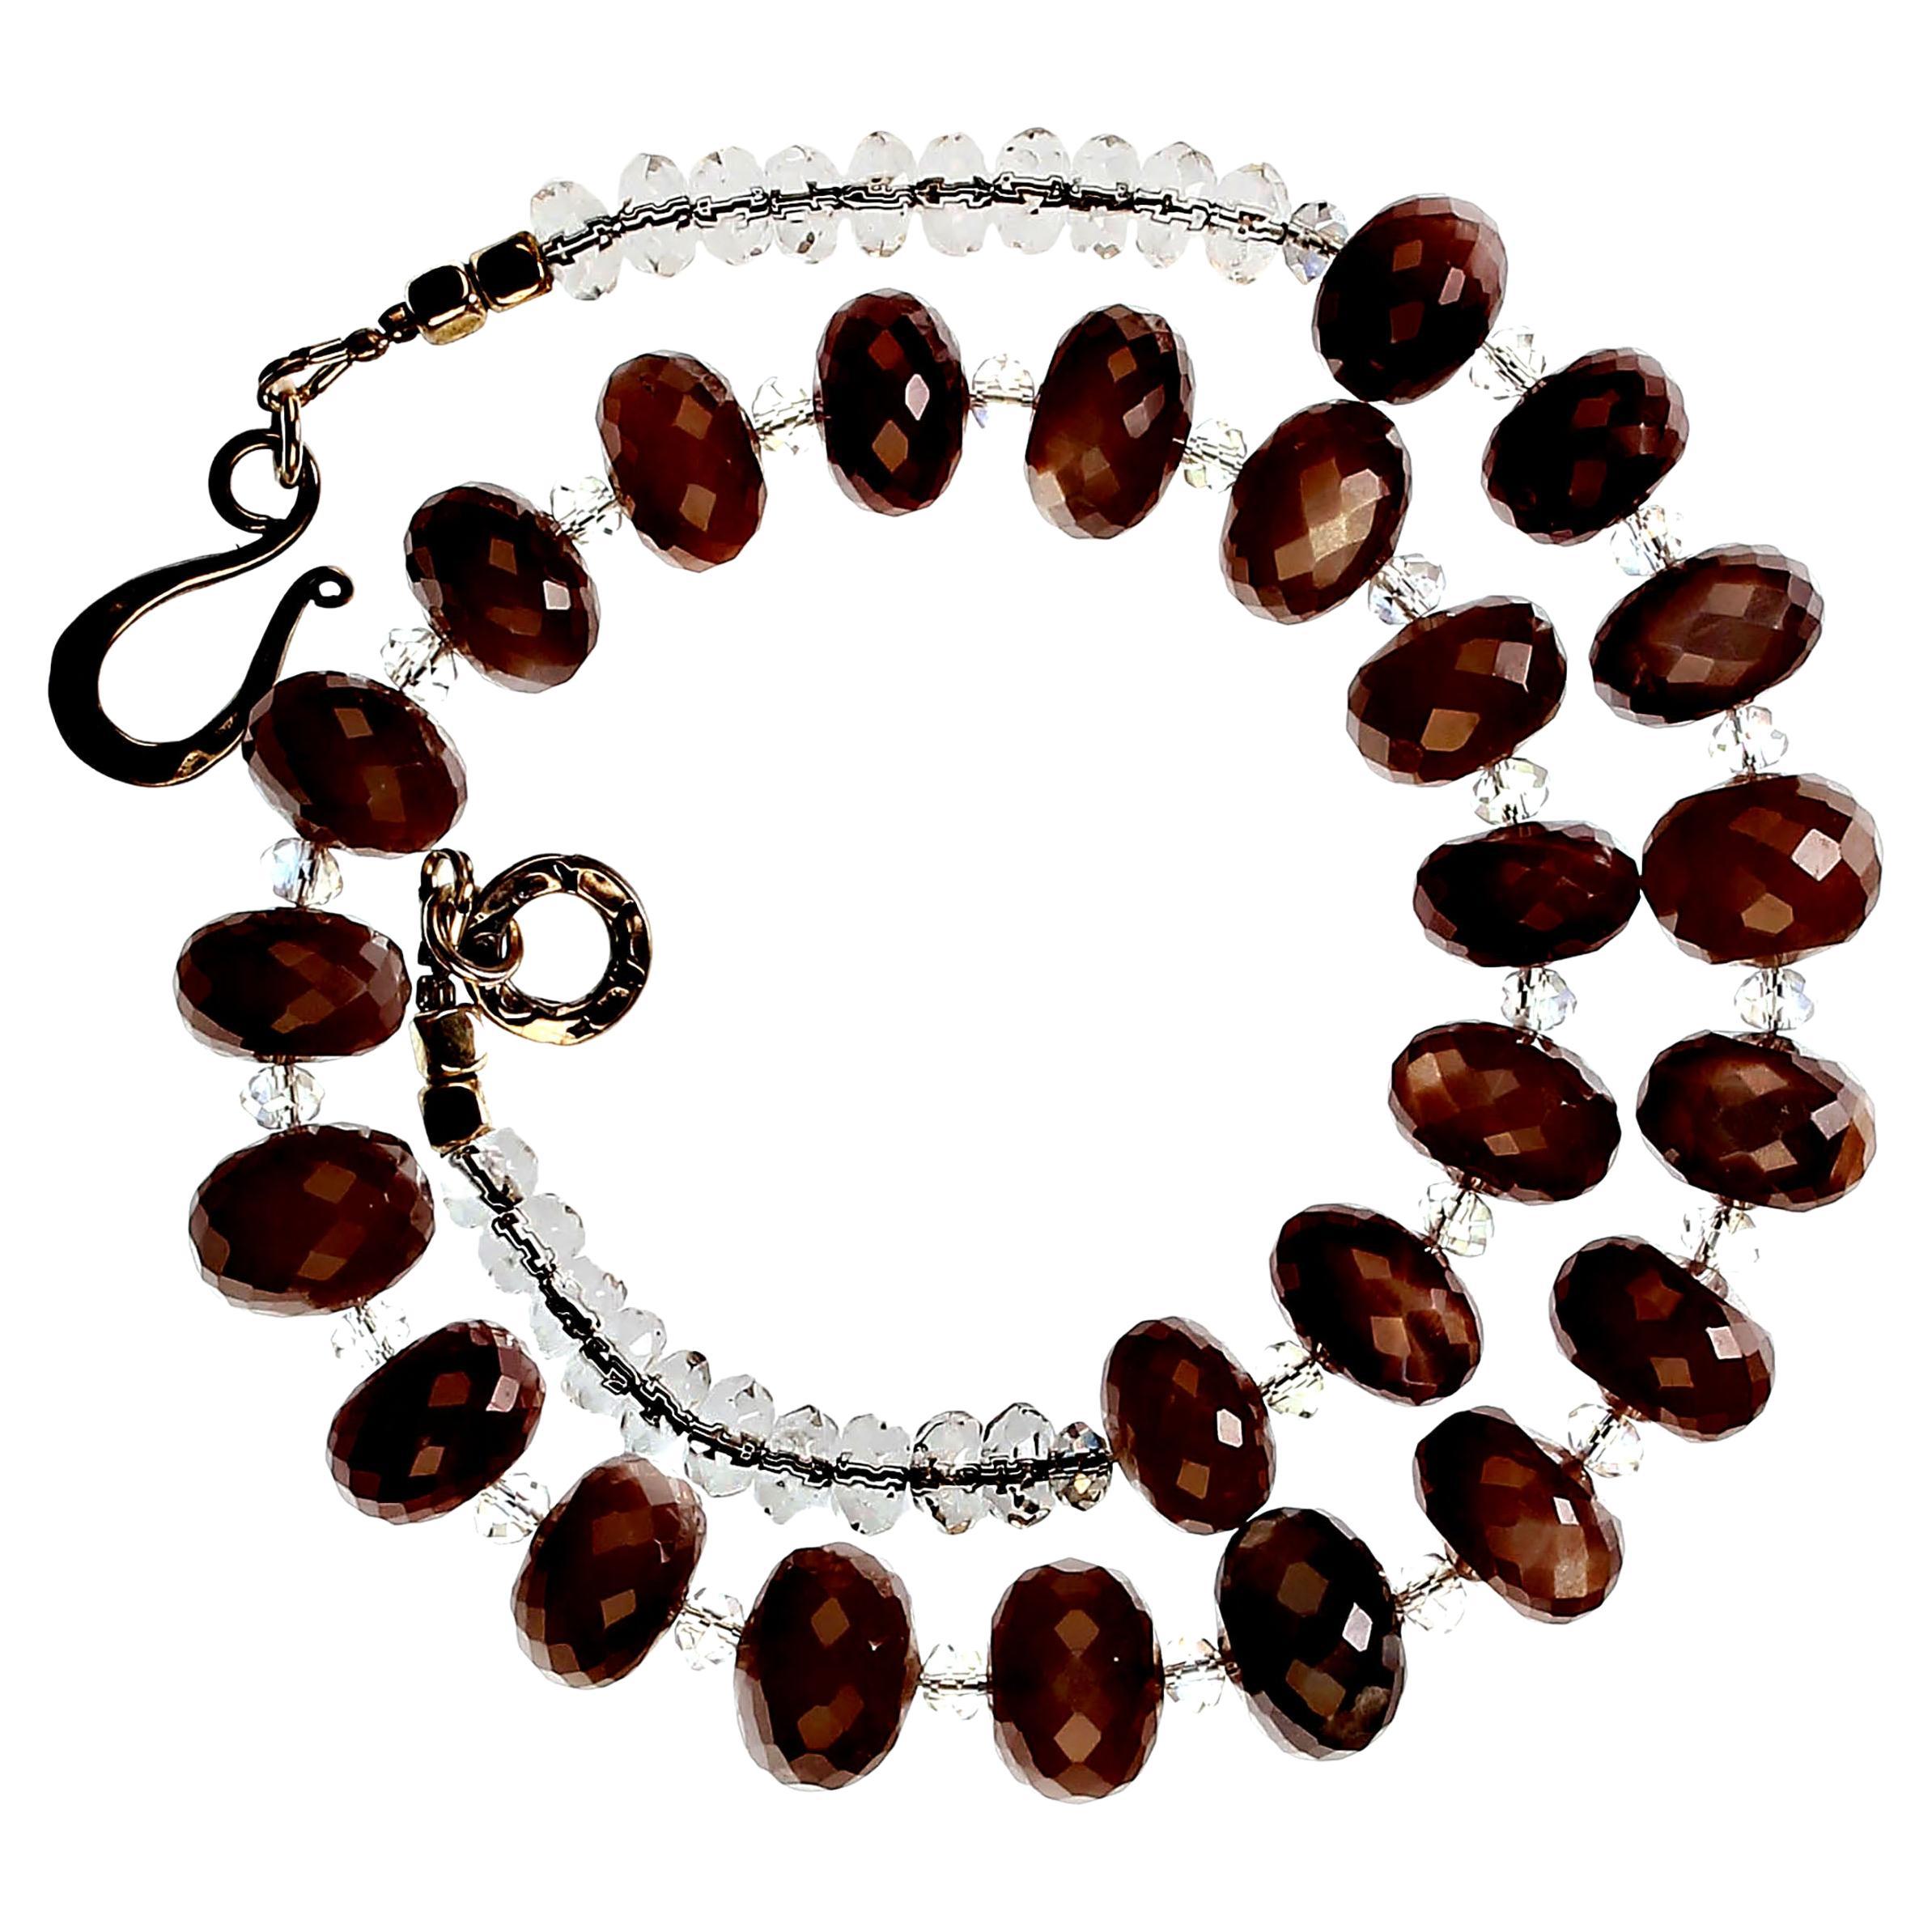 Custom made necklace of faceted chocolate Moonstone rondelles and clear faceted Crystals. This delightful necklace is 17 inches in length which allows it to sit comfortably at your neckline. The glittering chocolate Moonstone rondelles average 12